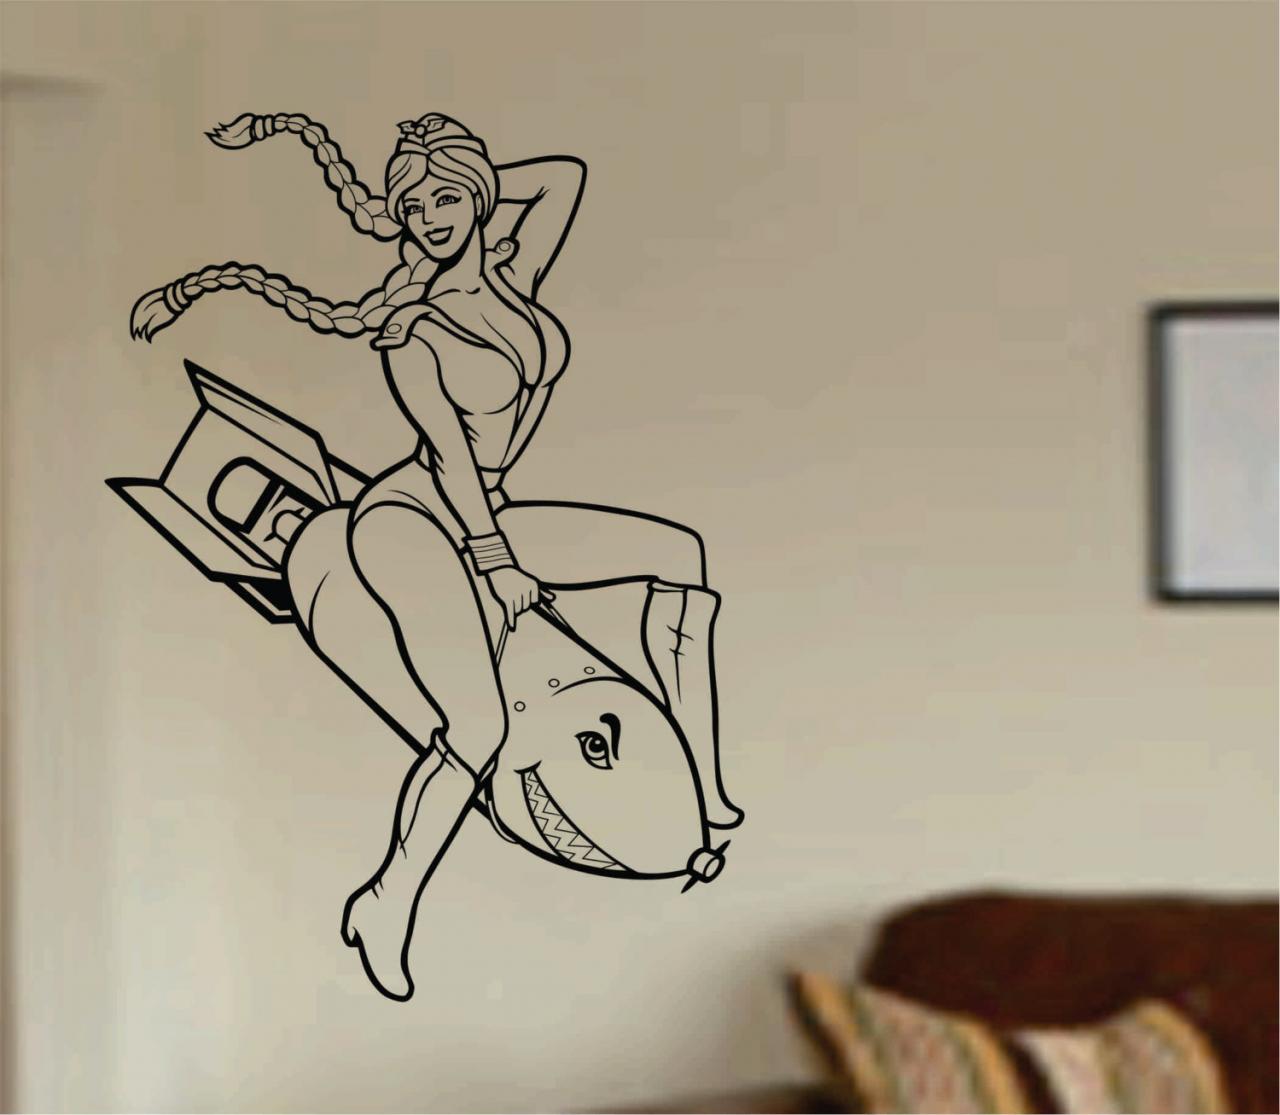 Pin Up Girl on Bomb Wall Vinyl Decal Sticker Art Graphic Stickers Decals